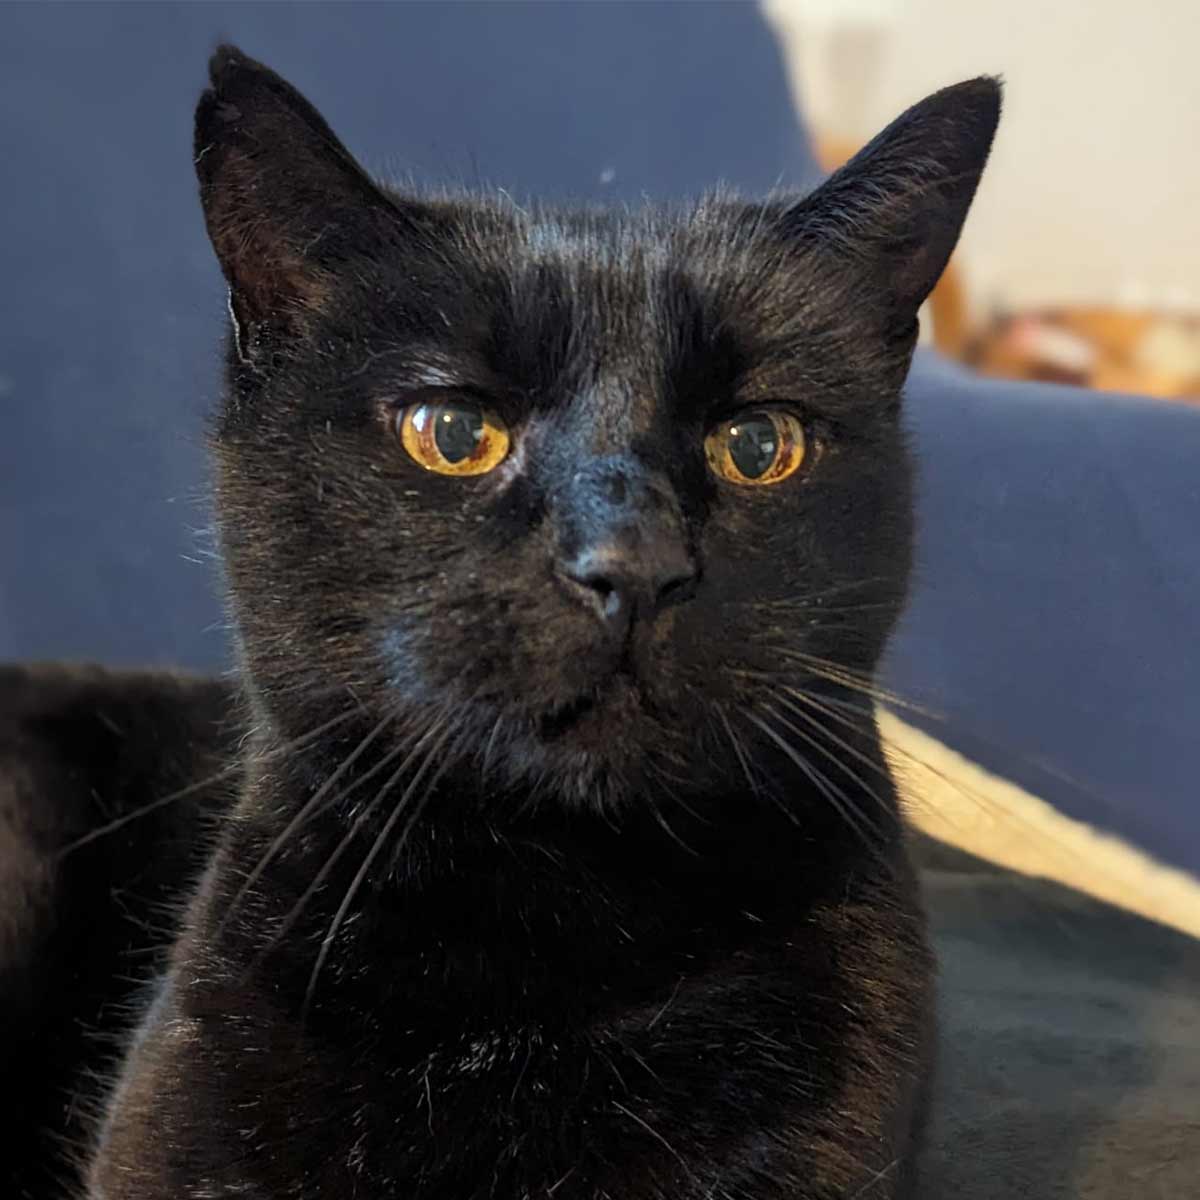 Meet Murphy, a fourteen-year-old feline looking for a retirement home. He’s cuddly, friendly and, despite his years, adores some playtime!! bit.ly/44tOrHf